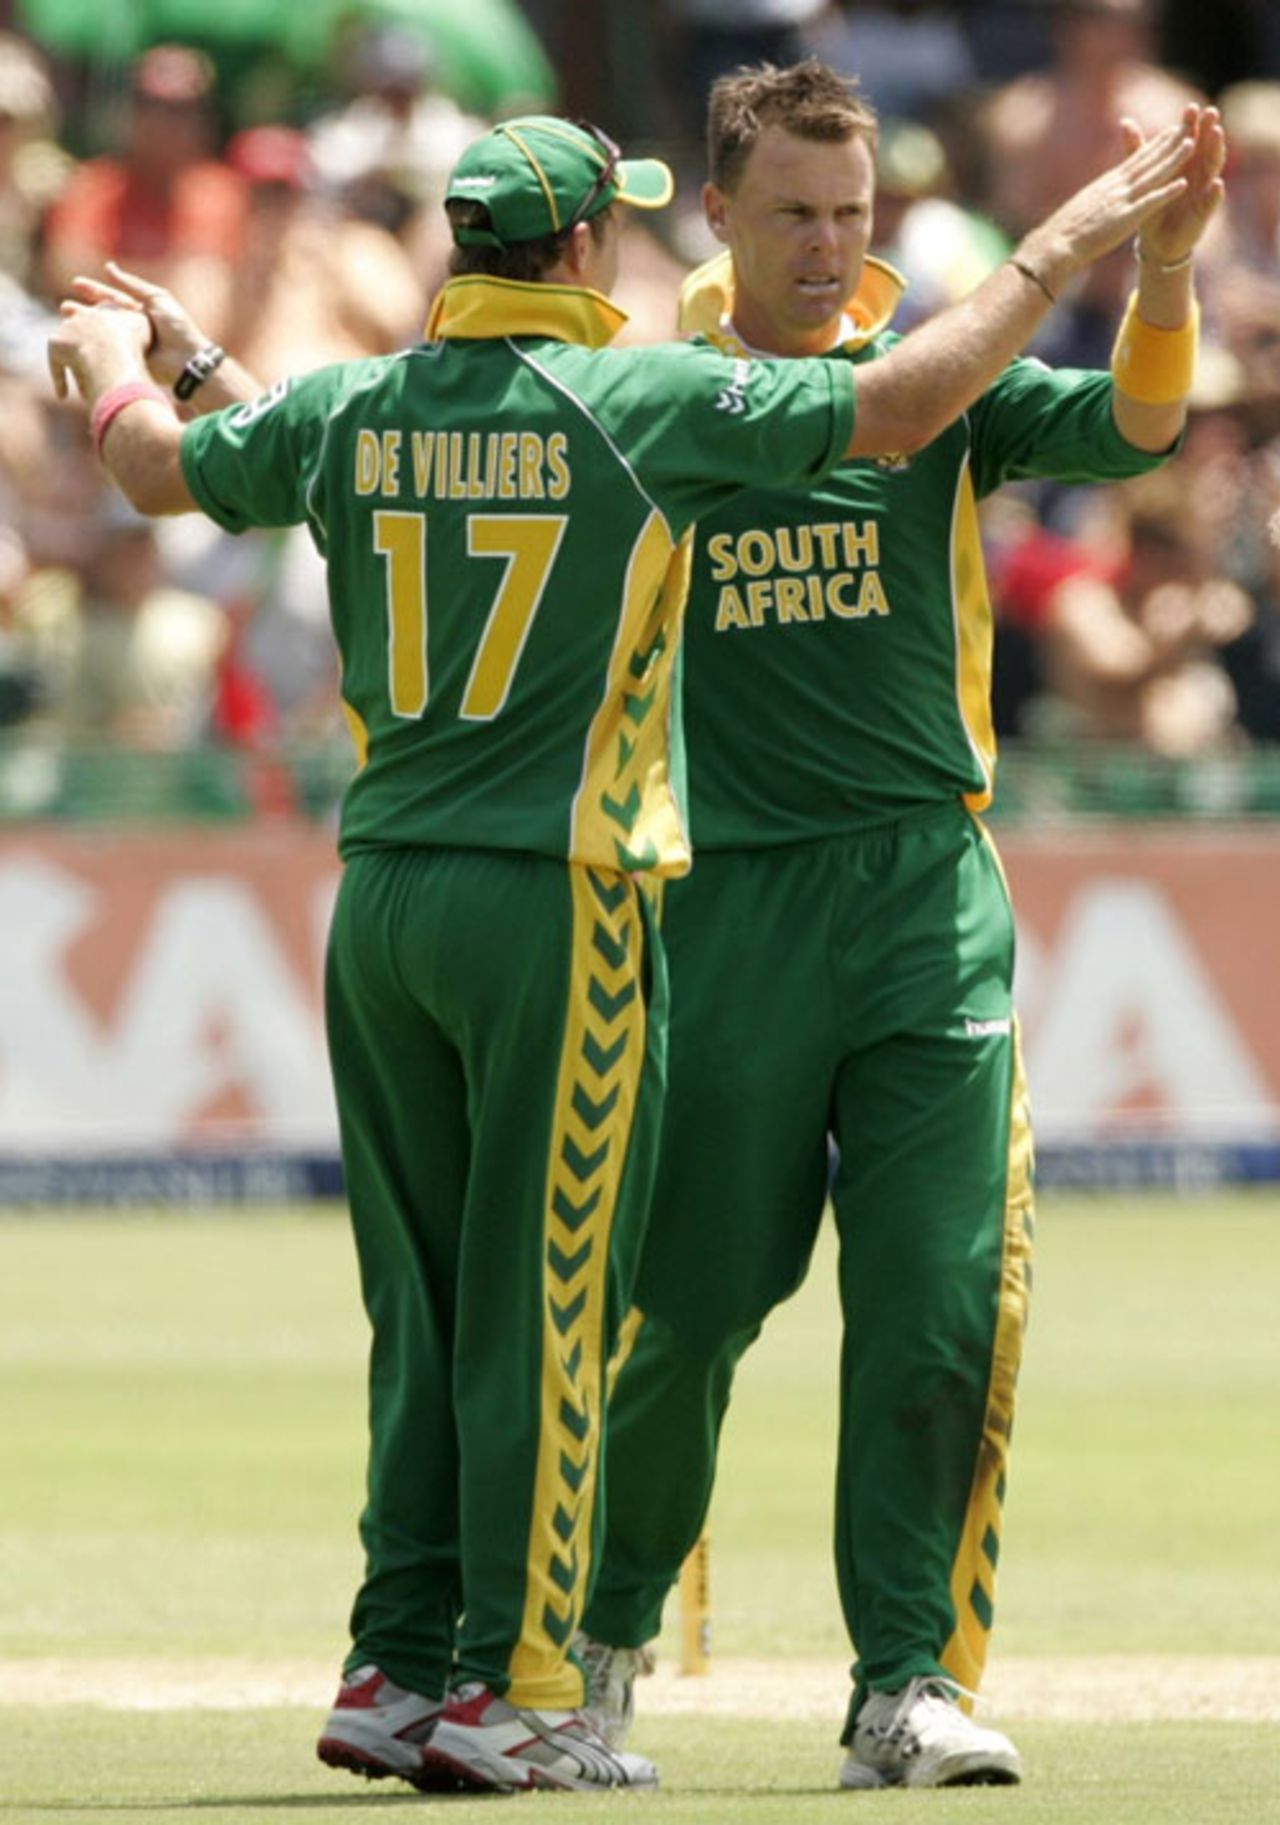 AB de Villiers congratulates Johan Botha on the first of his two wickets, South Africa v West Indies, 3rd ODI, Port Elizabeth, January 27, 2008